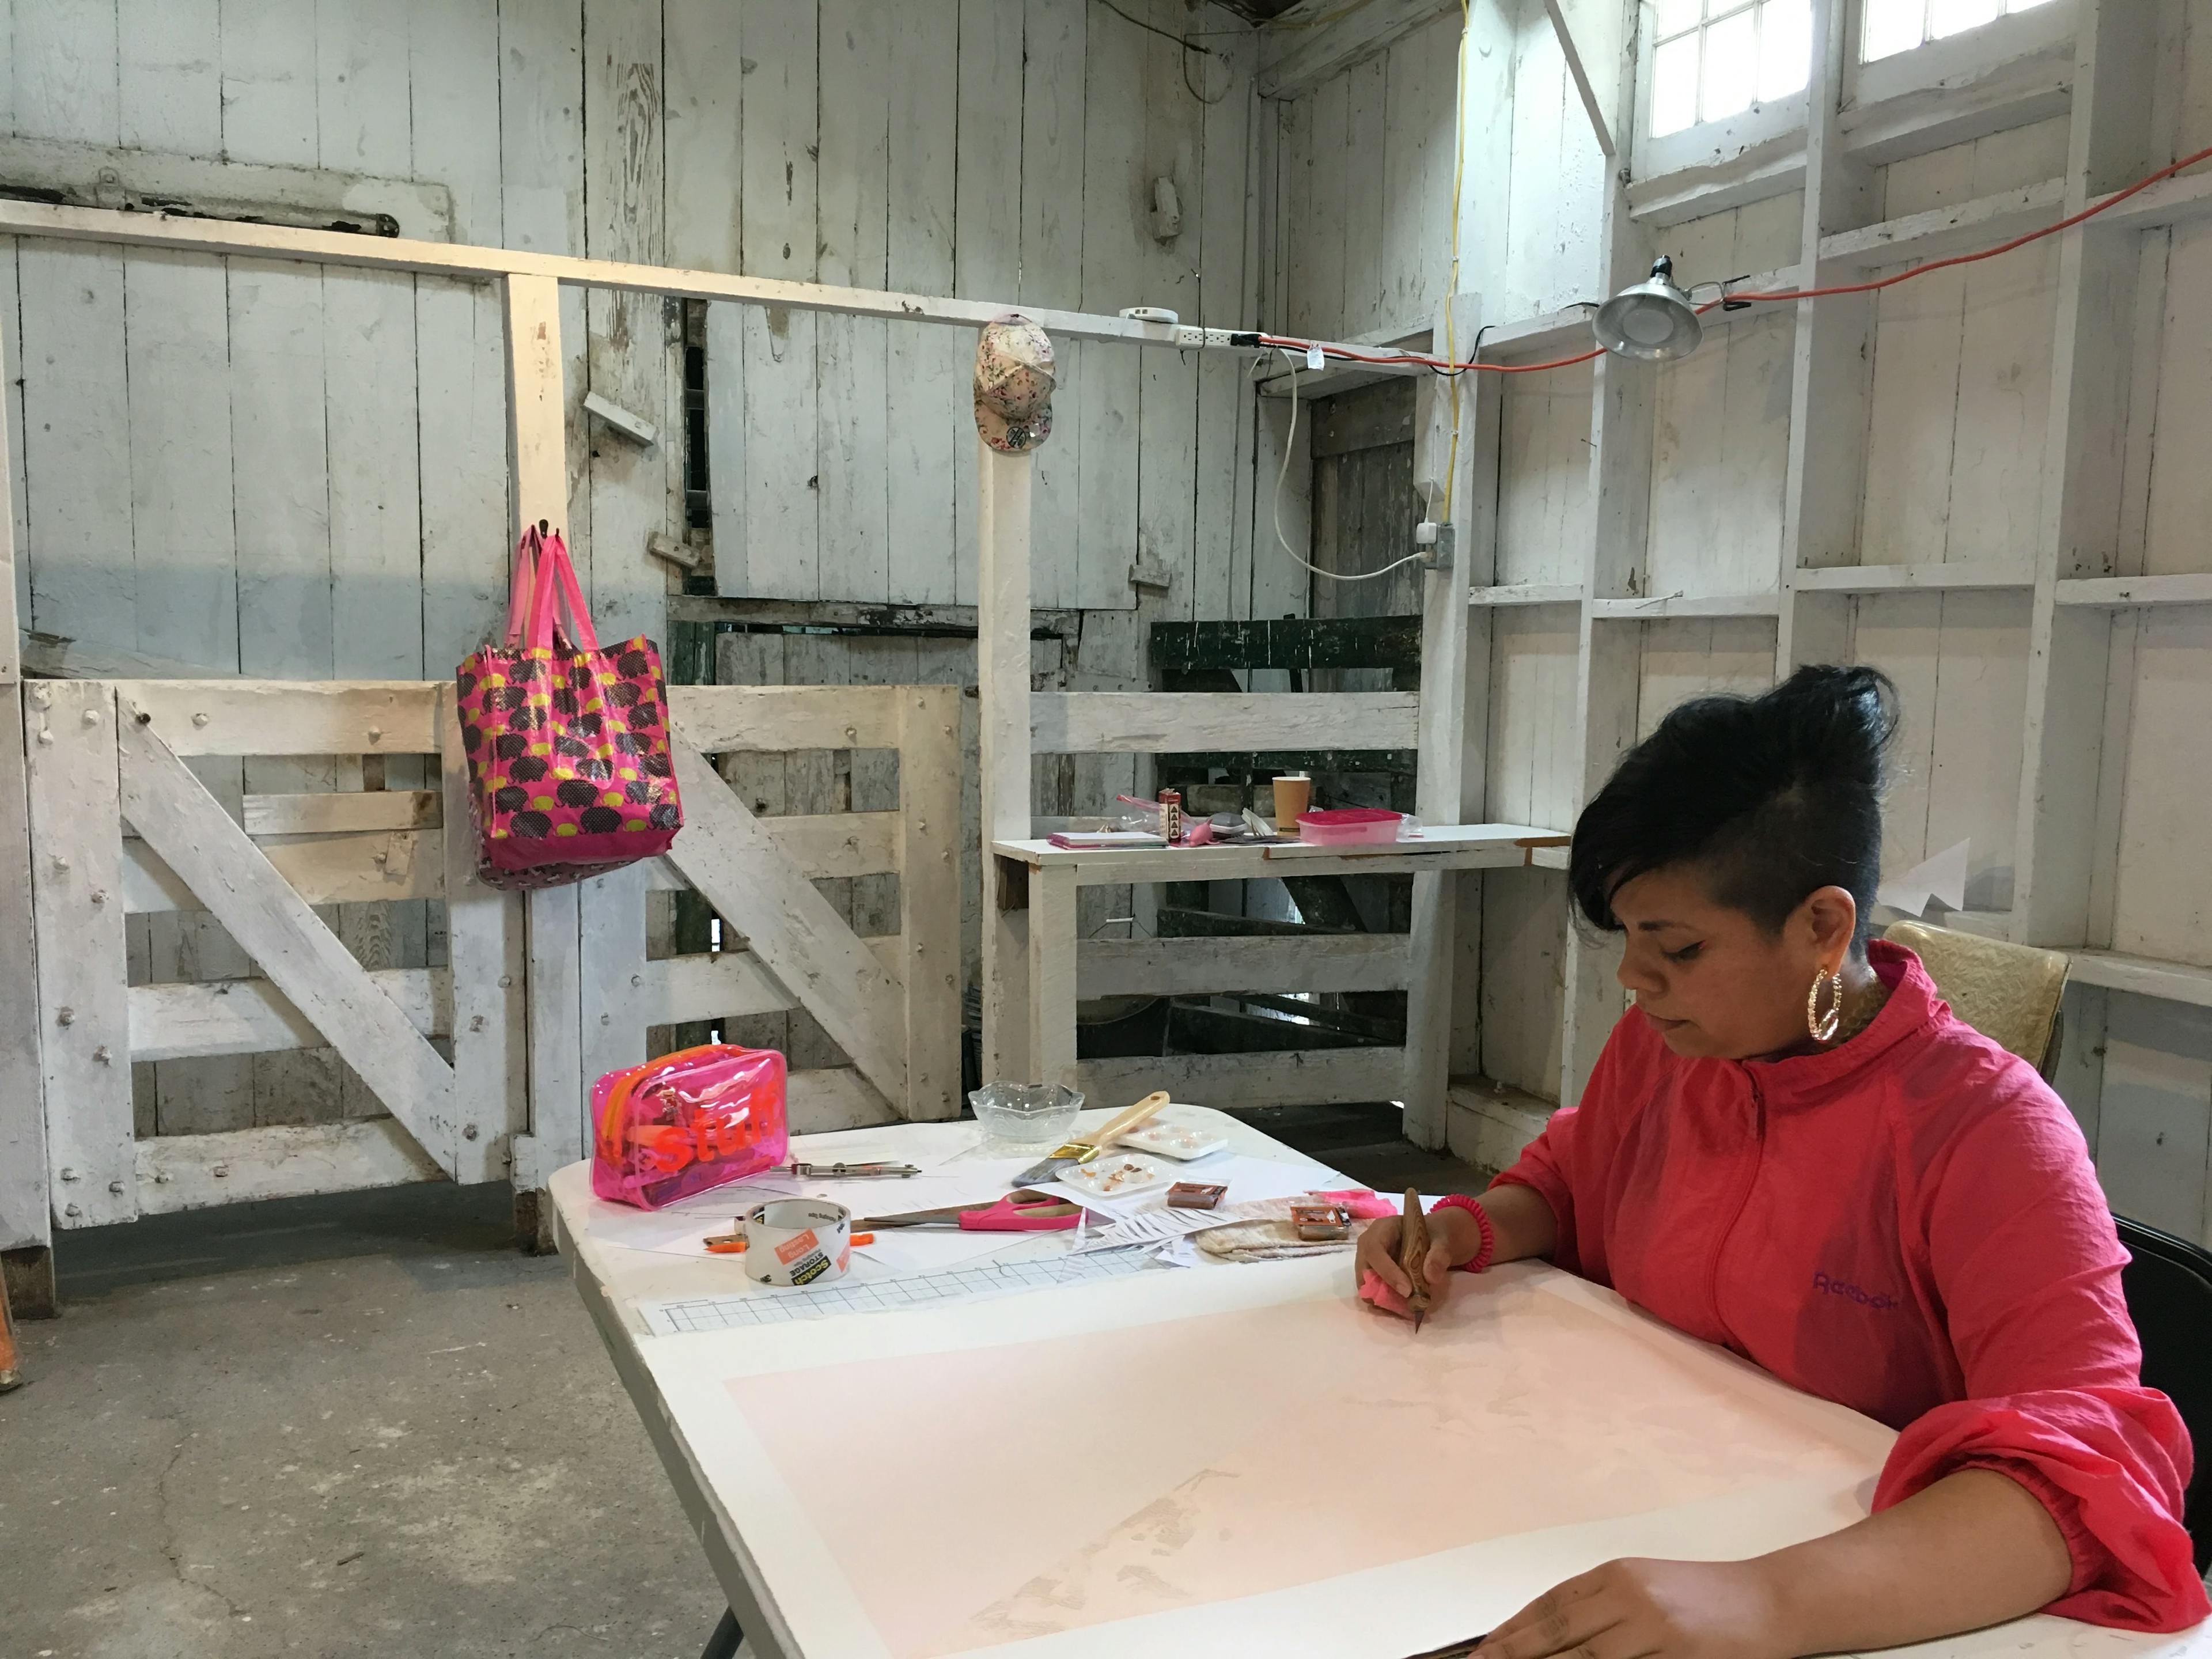 Artist Lucha Rodríguez sitting at a table in her studio, using a knife on her paper compositions.